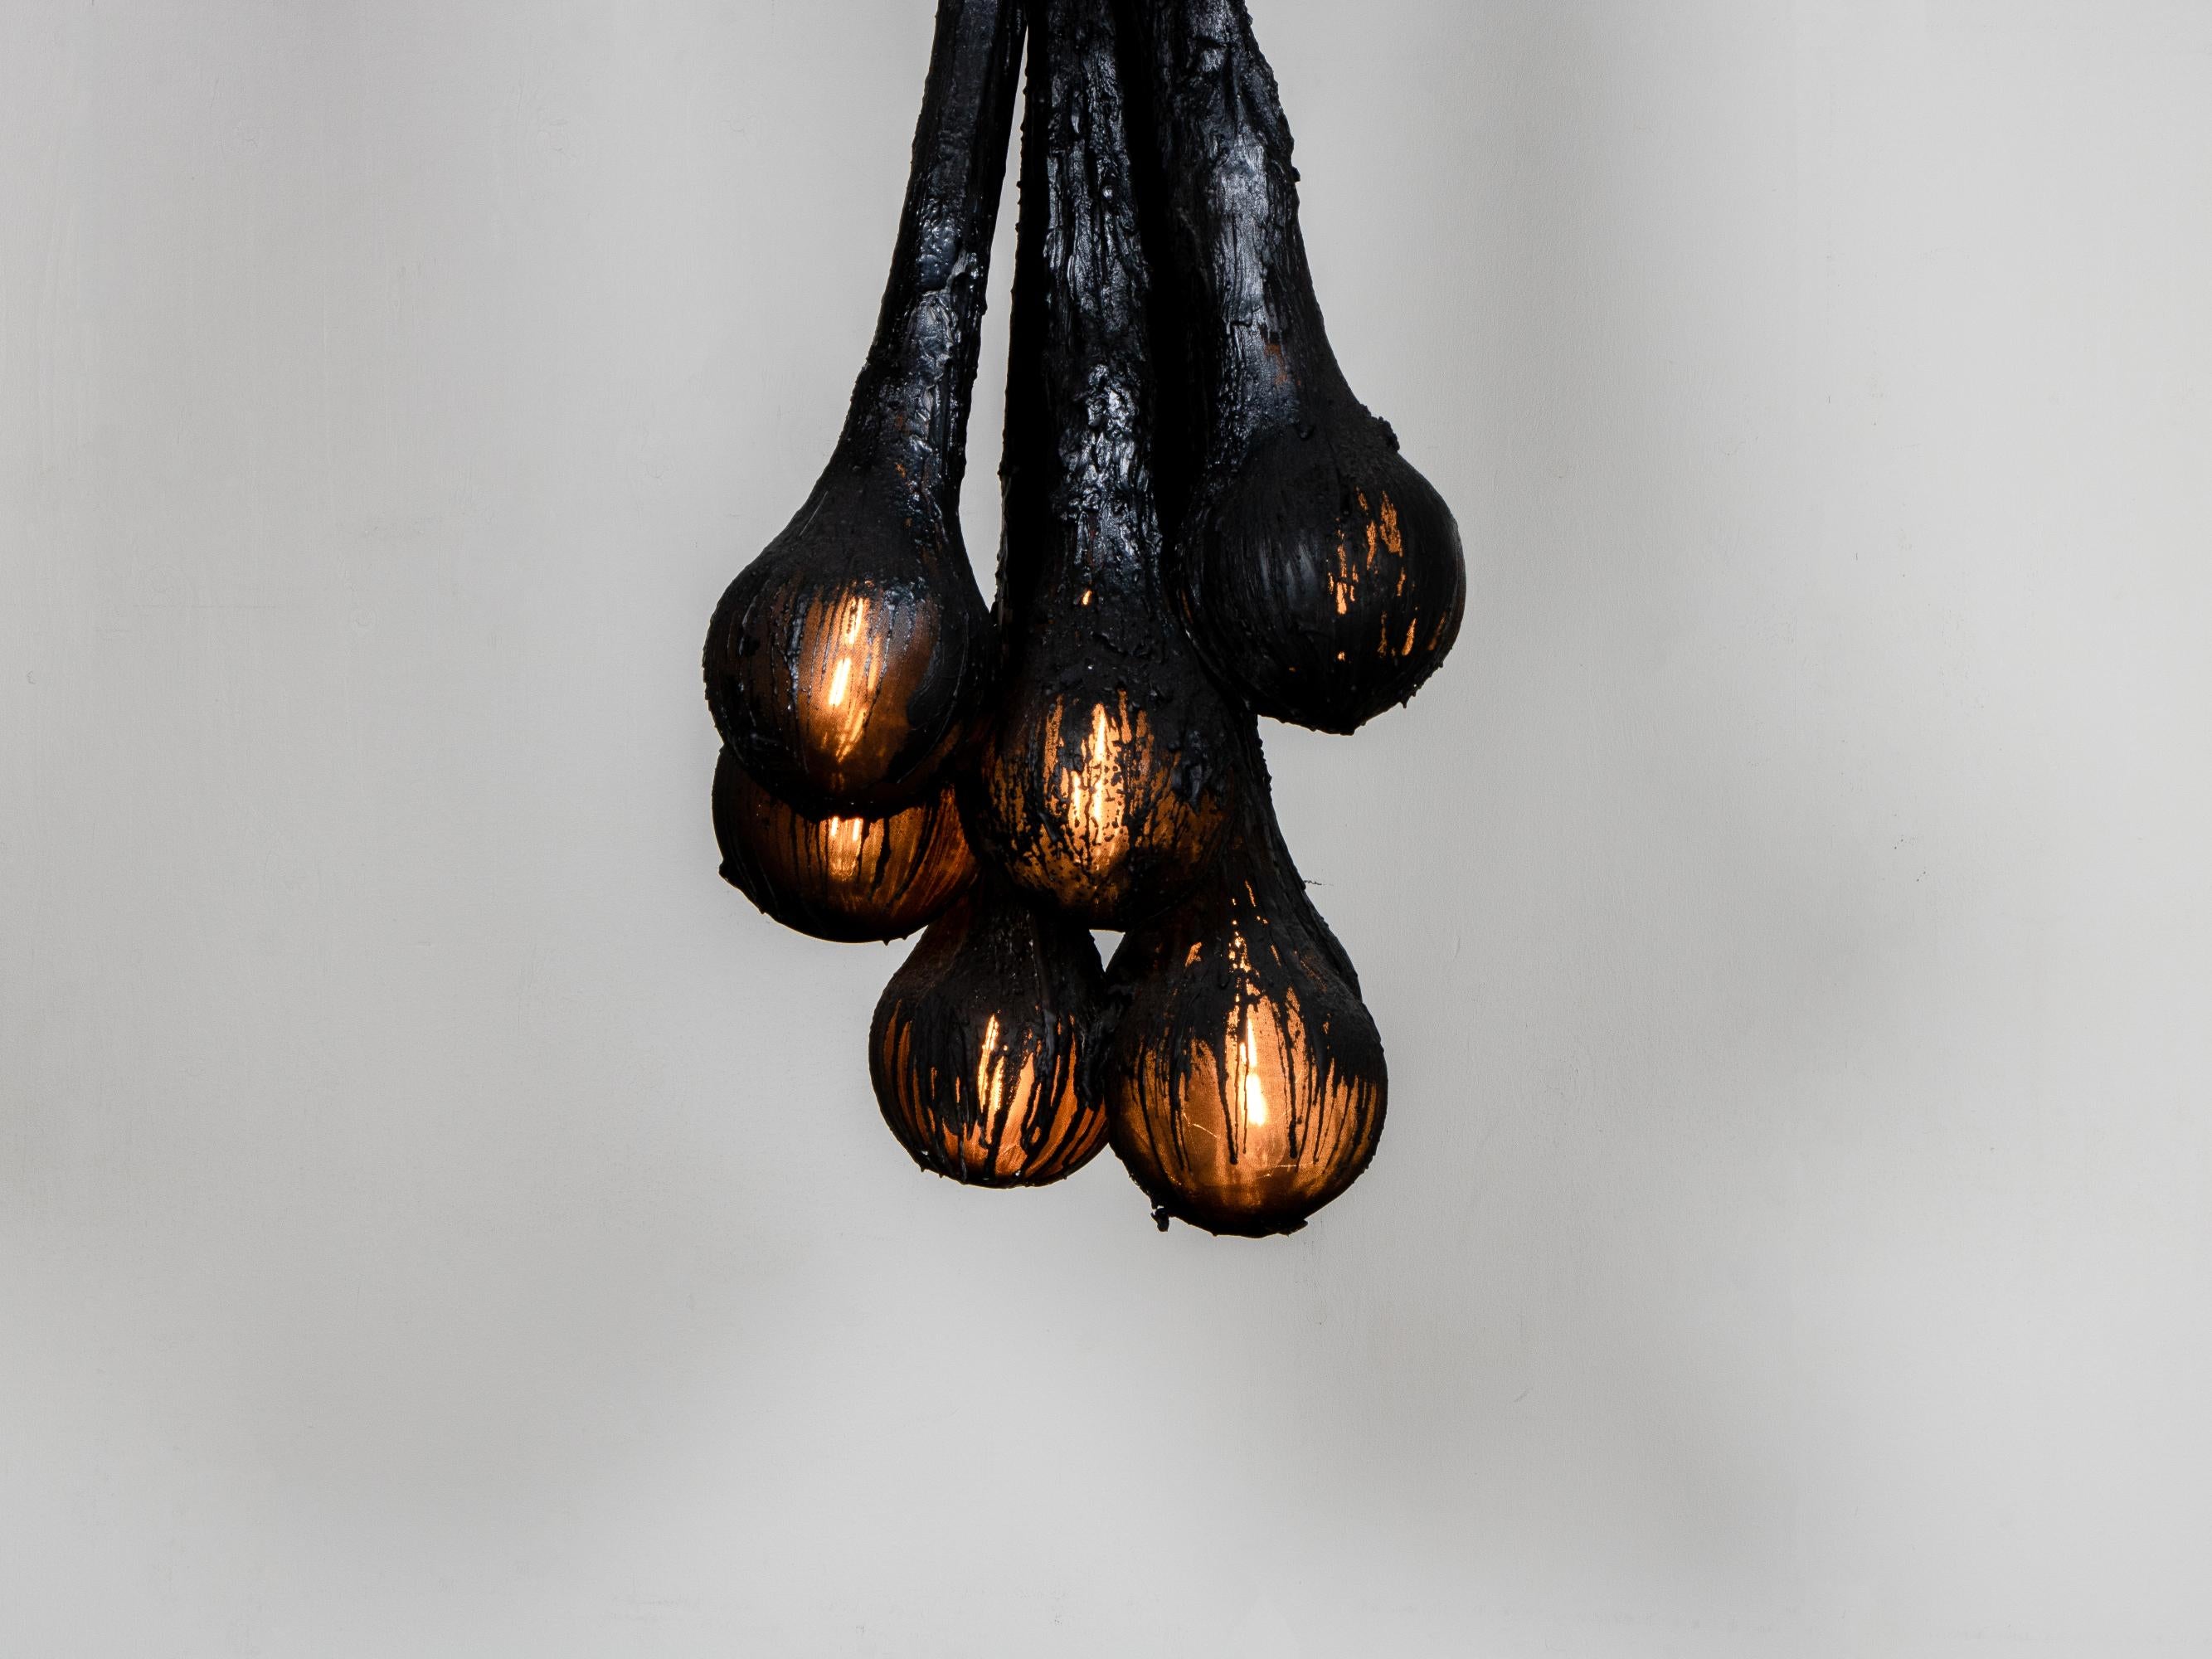 Pung lamp by Lucas Morten
2018
Limited edition of 7
Dimensions: ø 50, H 127
Material: Resin

Pung lamp is a work made to symbolize how human emotions often are held storaged in a dark fog. With this lamp Lucas Morten wants to lighten those